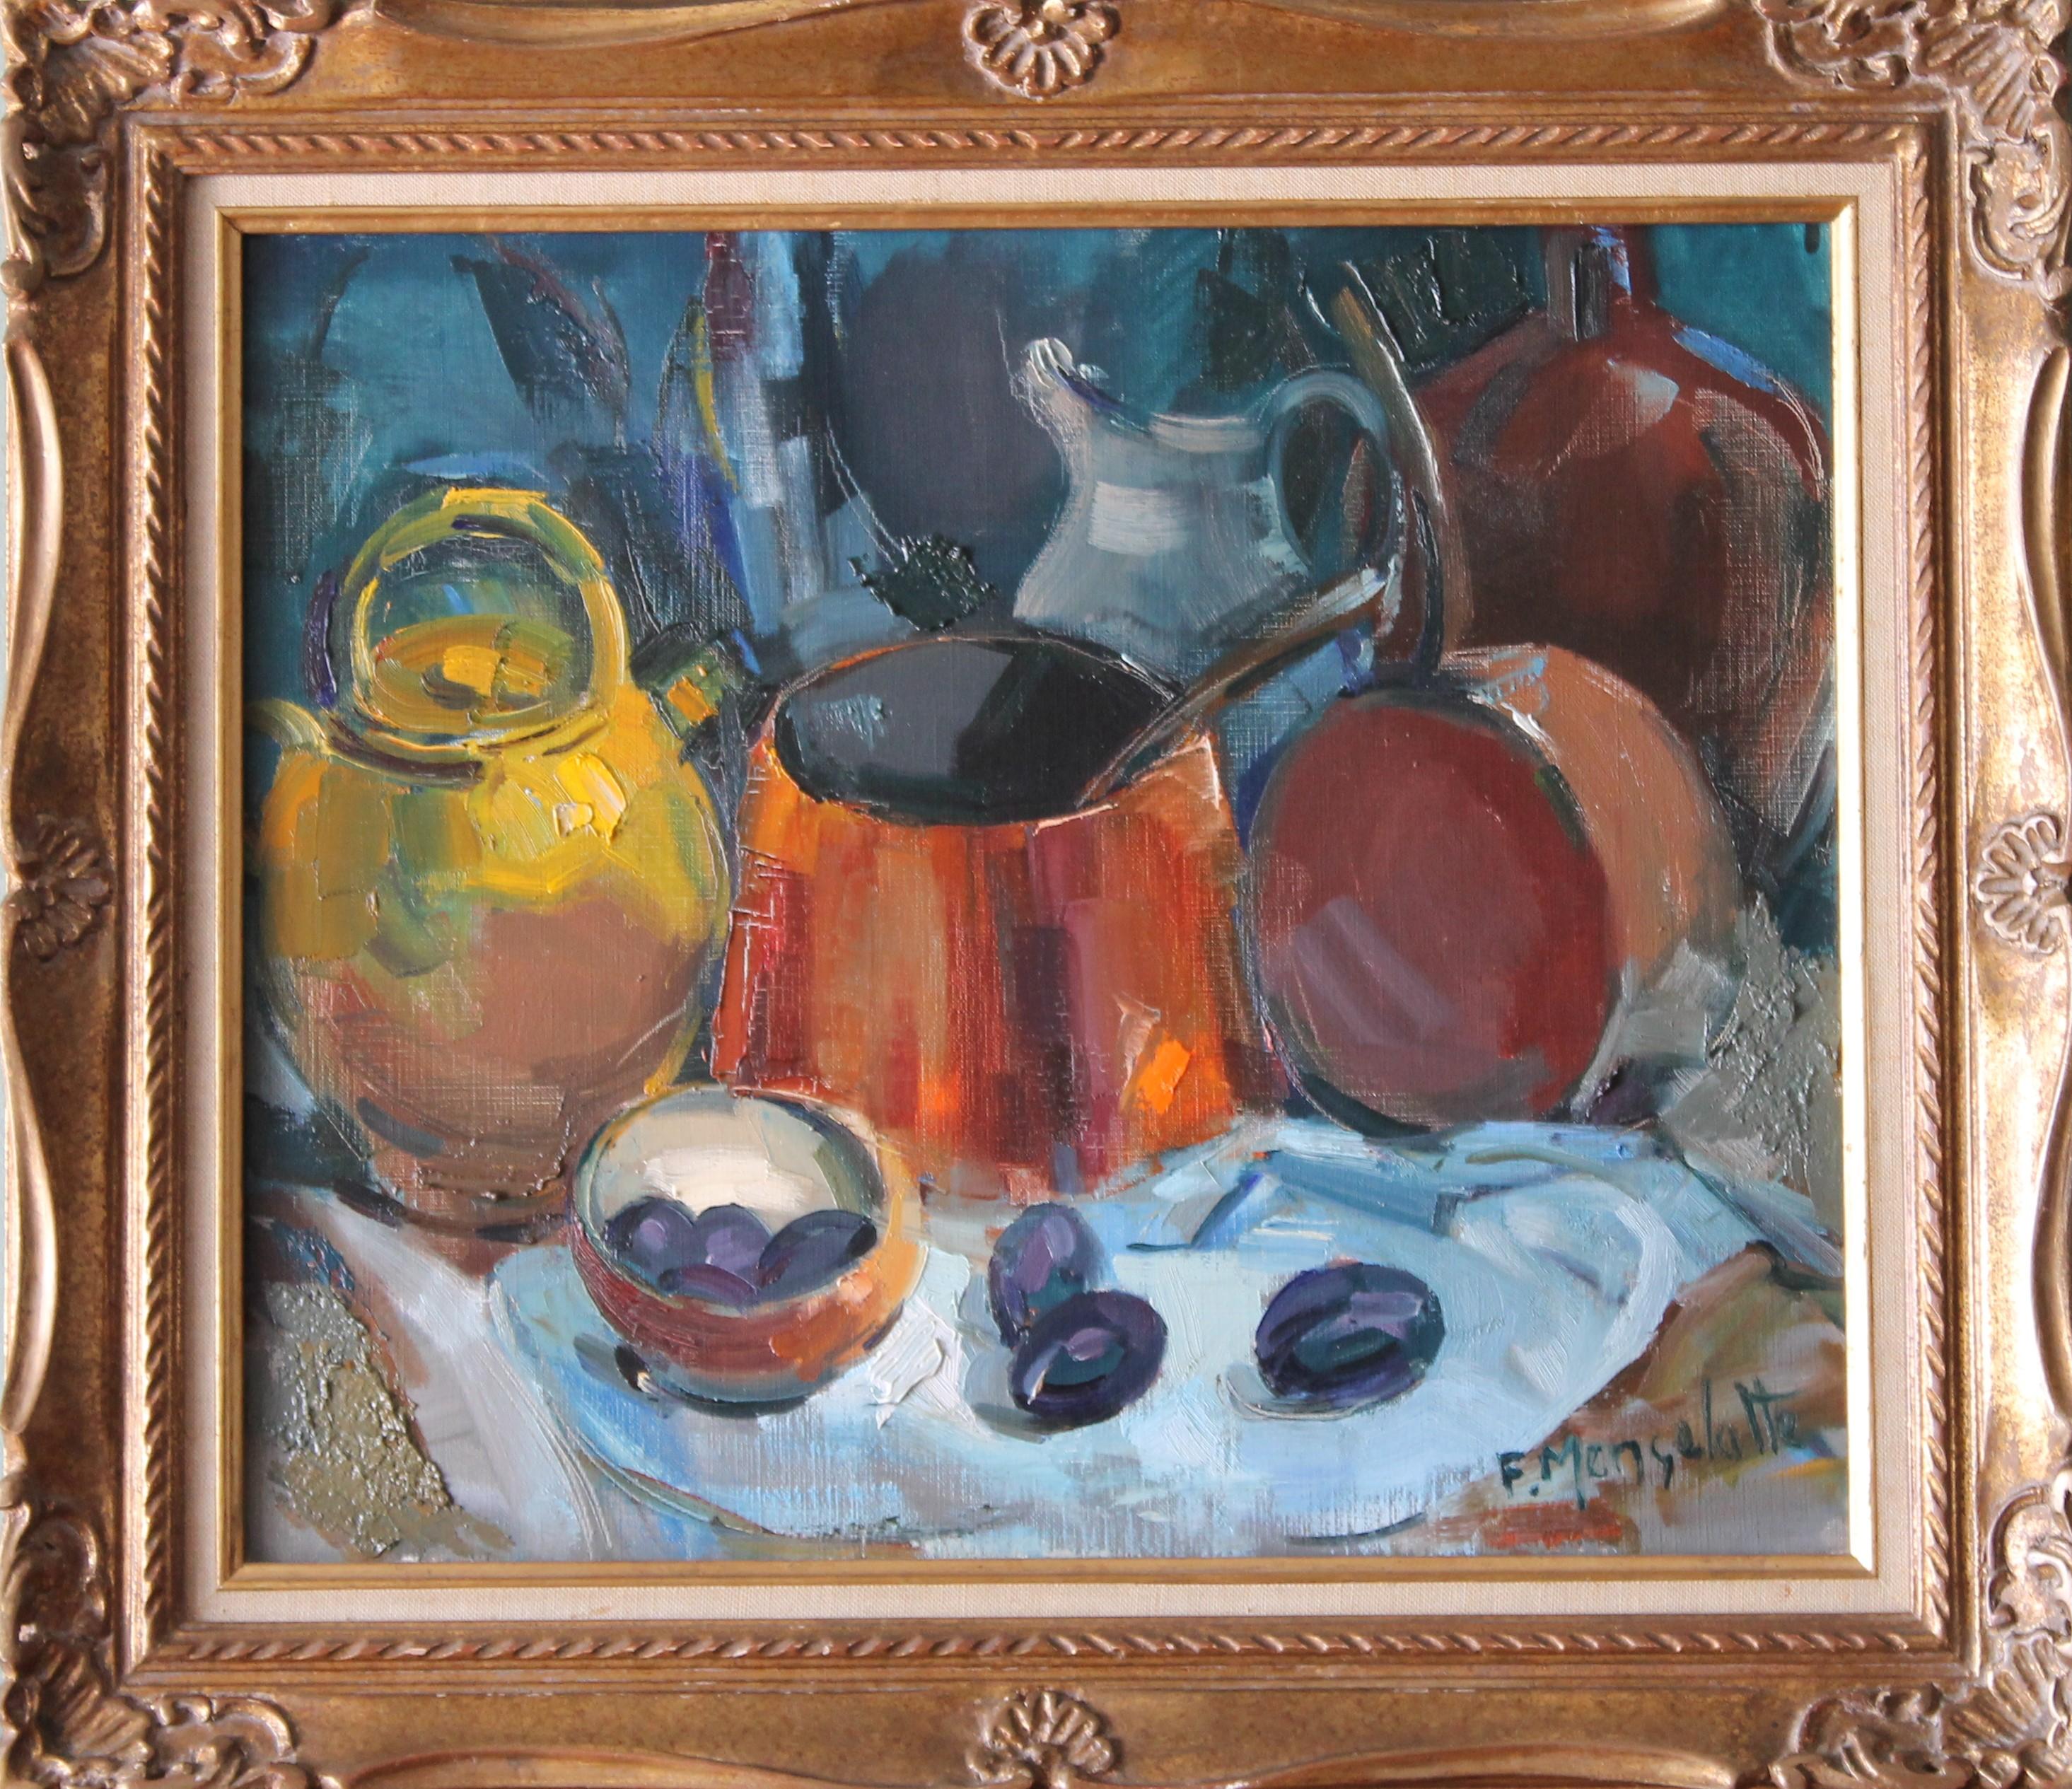 Francois Mengalatte Portrait Painting - Still Life with fruit oil painting of copper pots and prunes, vintage framed